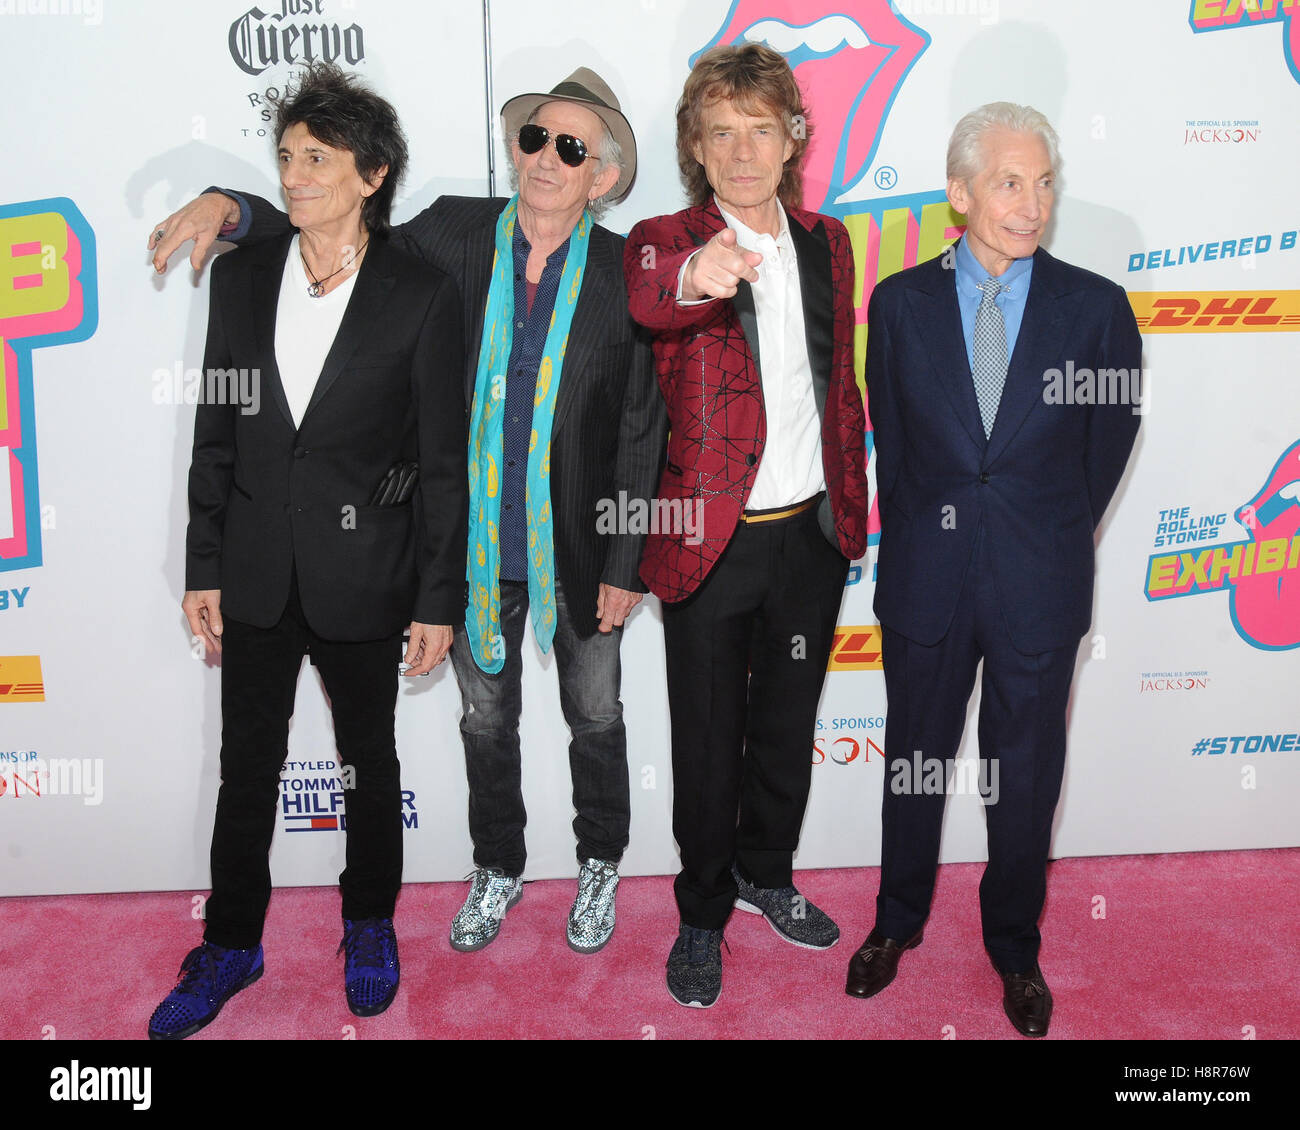 New York, NY, USA. 15th Nov, 2016. (L-R) Ronnie Wood, Keith Richards, Mick Jagger and Charlie Watts of The Rolling Stones attend The Rolling Stones Exhibitionism opening night at Industria Superstudio on November 15, 2016 in New York City. © John Palmer M Stock Photo